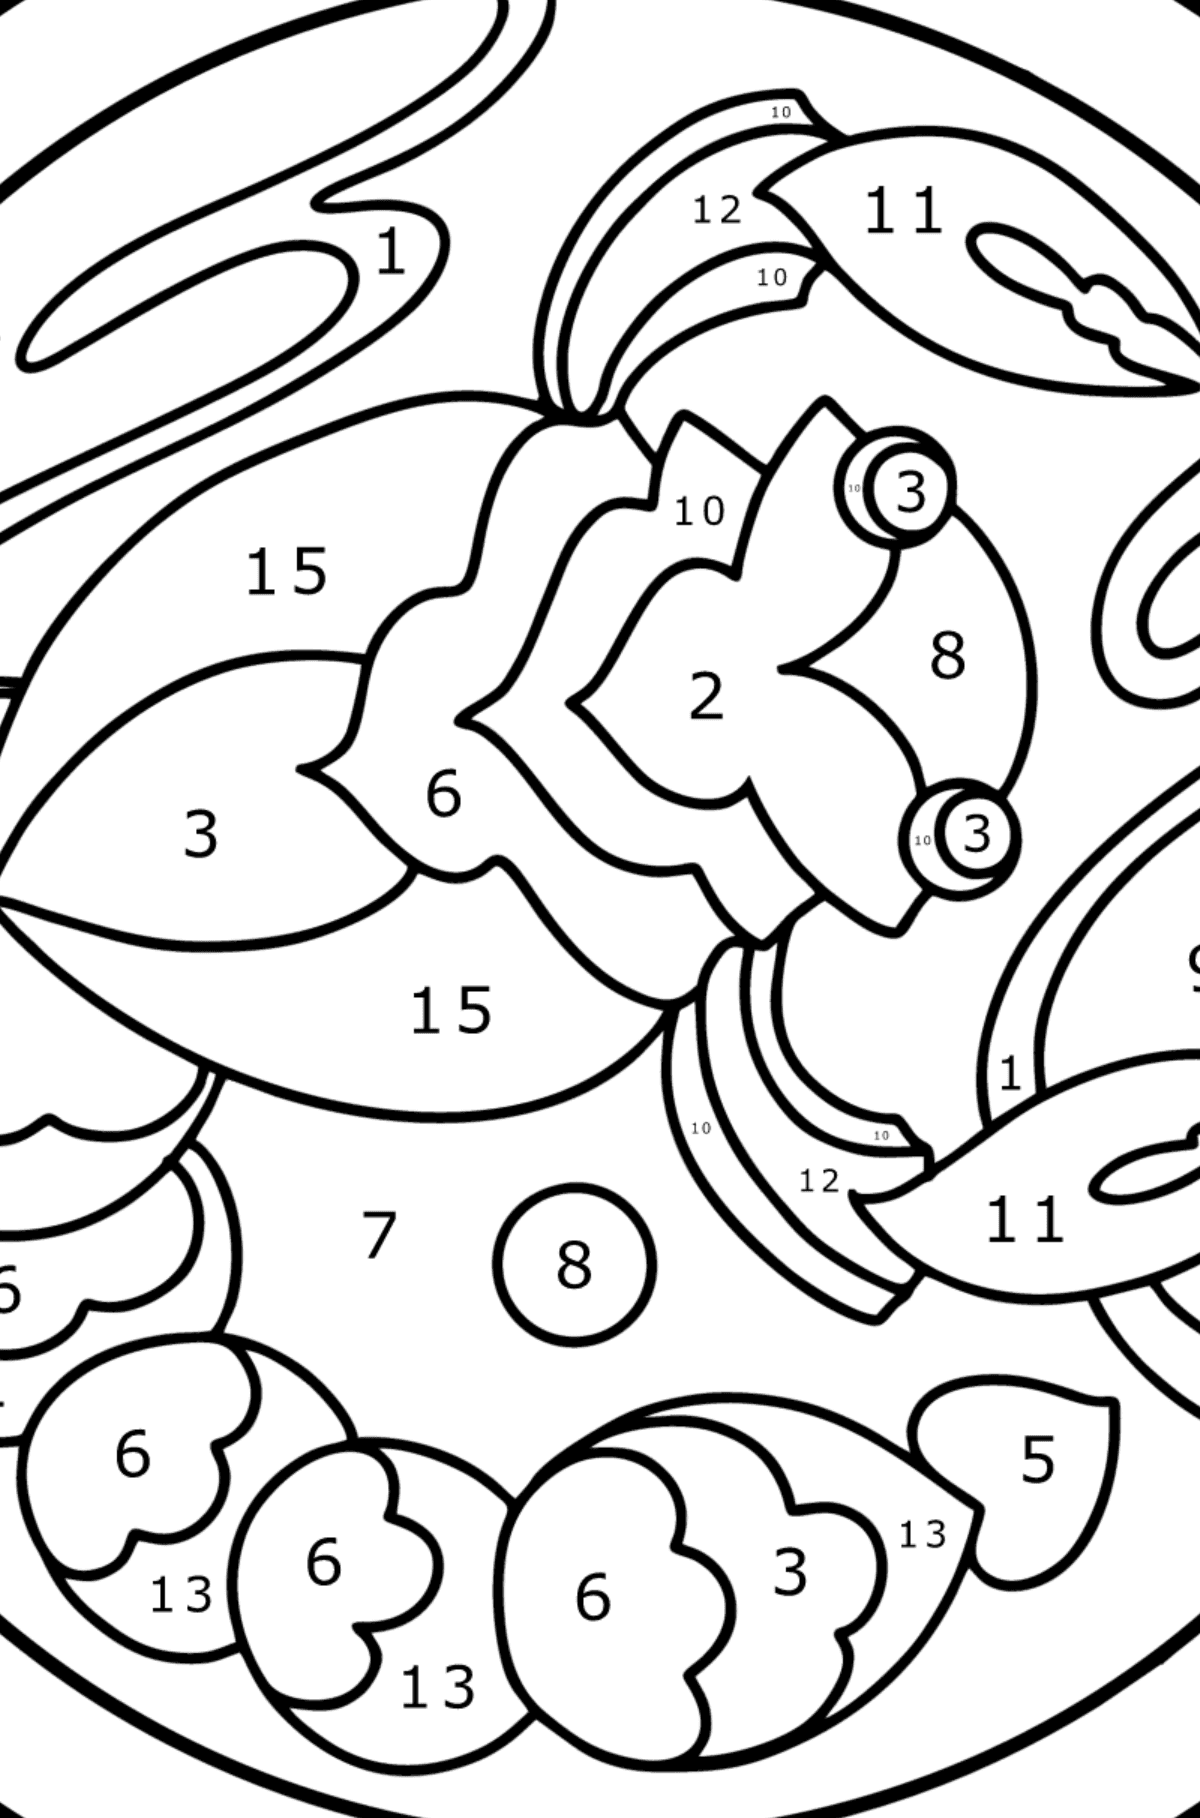 Coloring page for kids - zodiac sign Scorpio - Coloring by Numbers for Kids